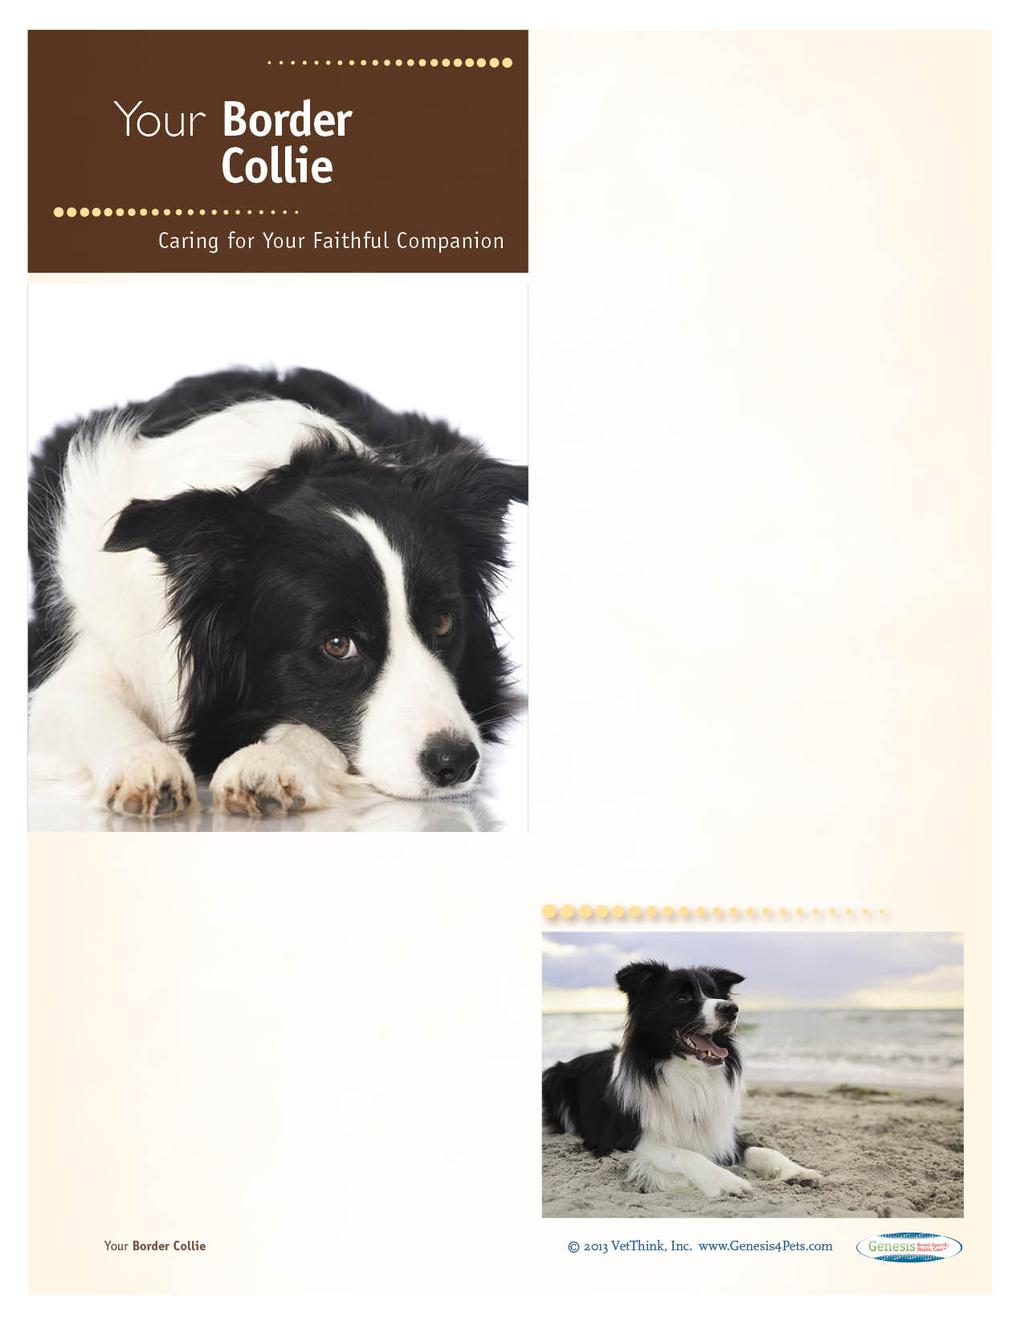 Border Collies: What a Unique Breed! Your dog is special! She's your best friend, companion, and a source of unconditional love.